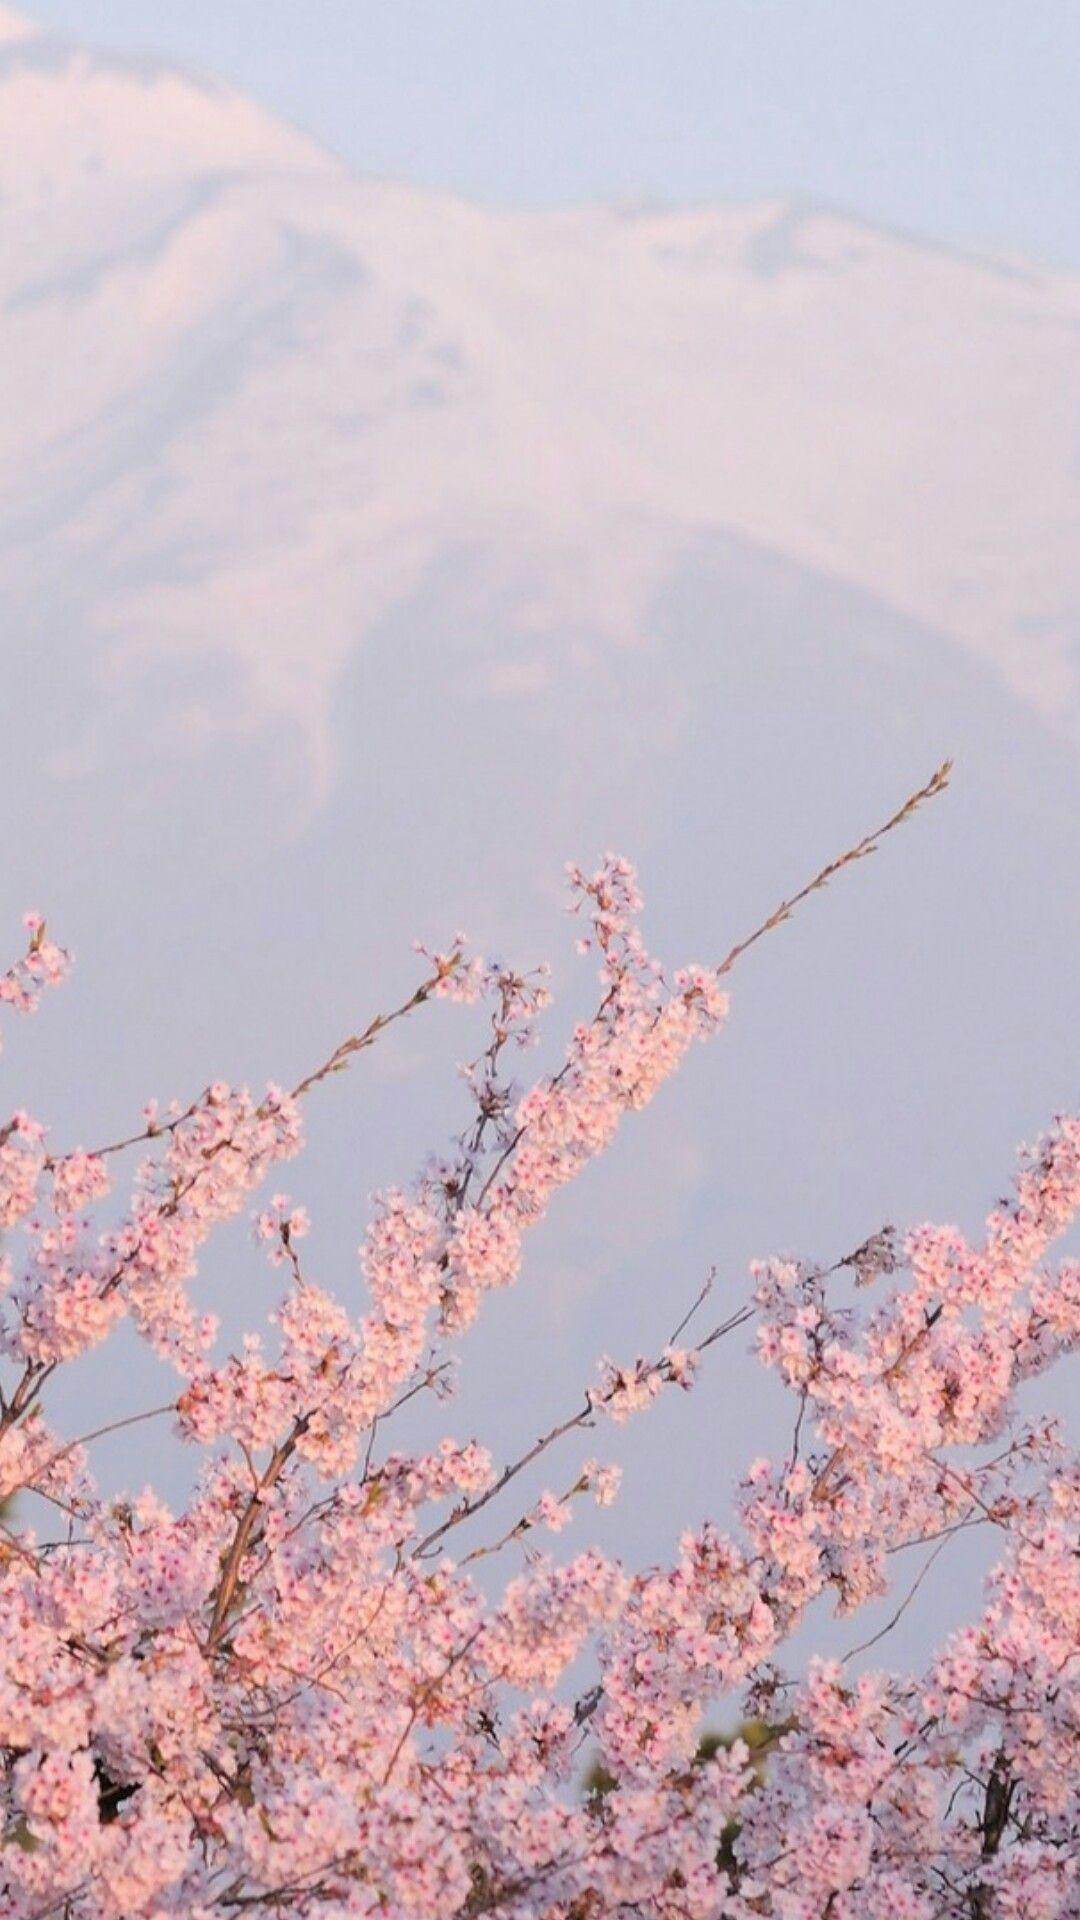 Aesthetic background of cherry blossoms in front of a mountain - Cherry blossom